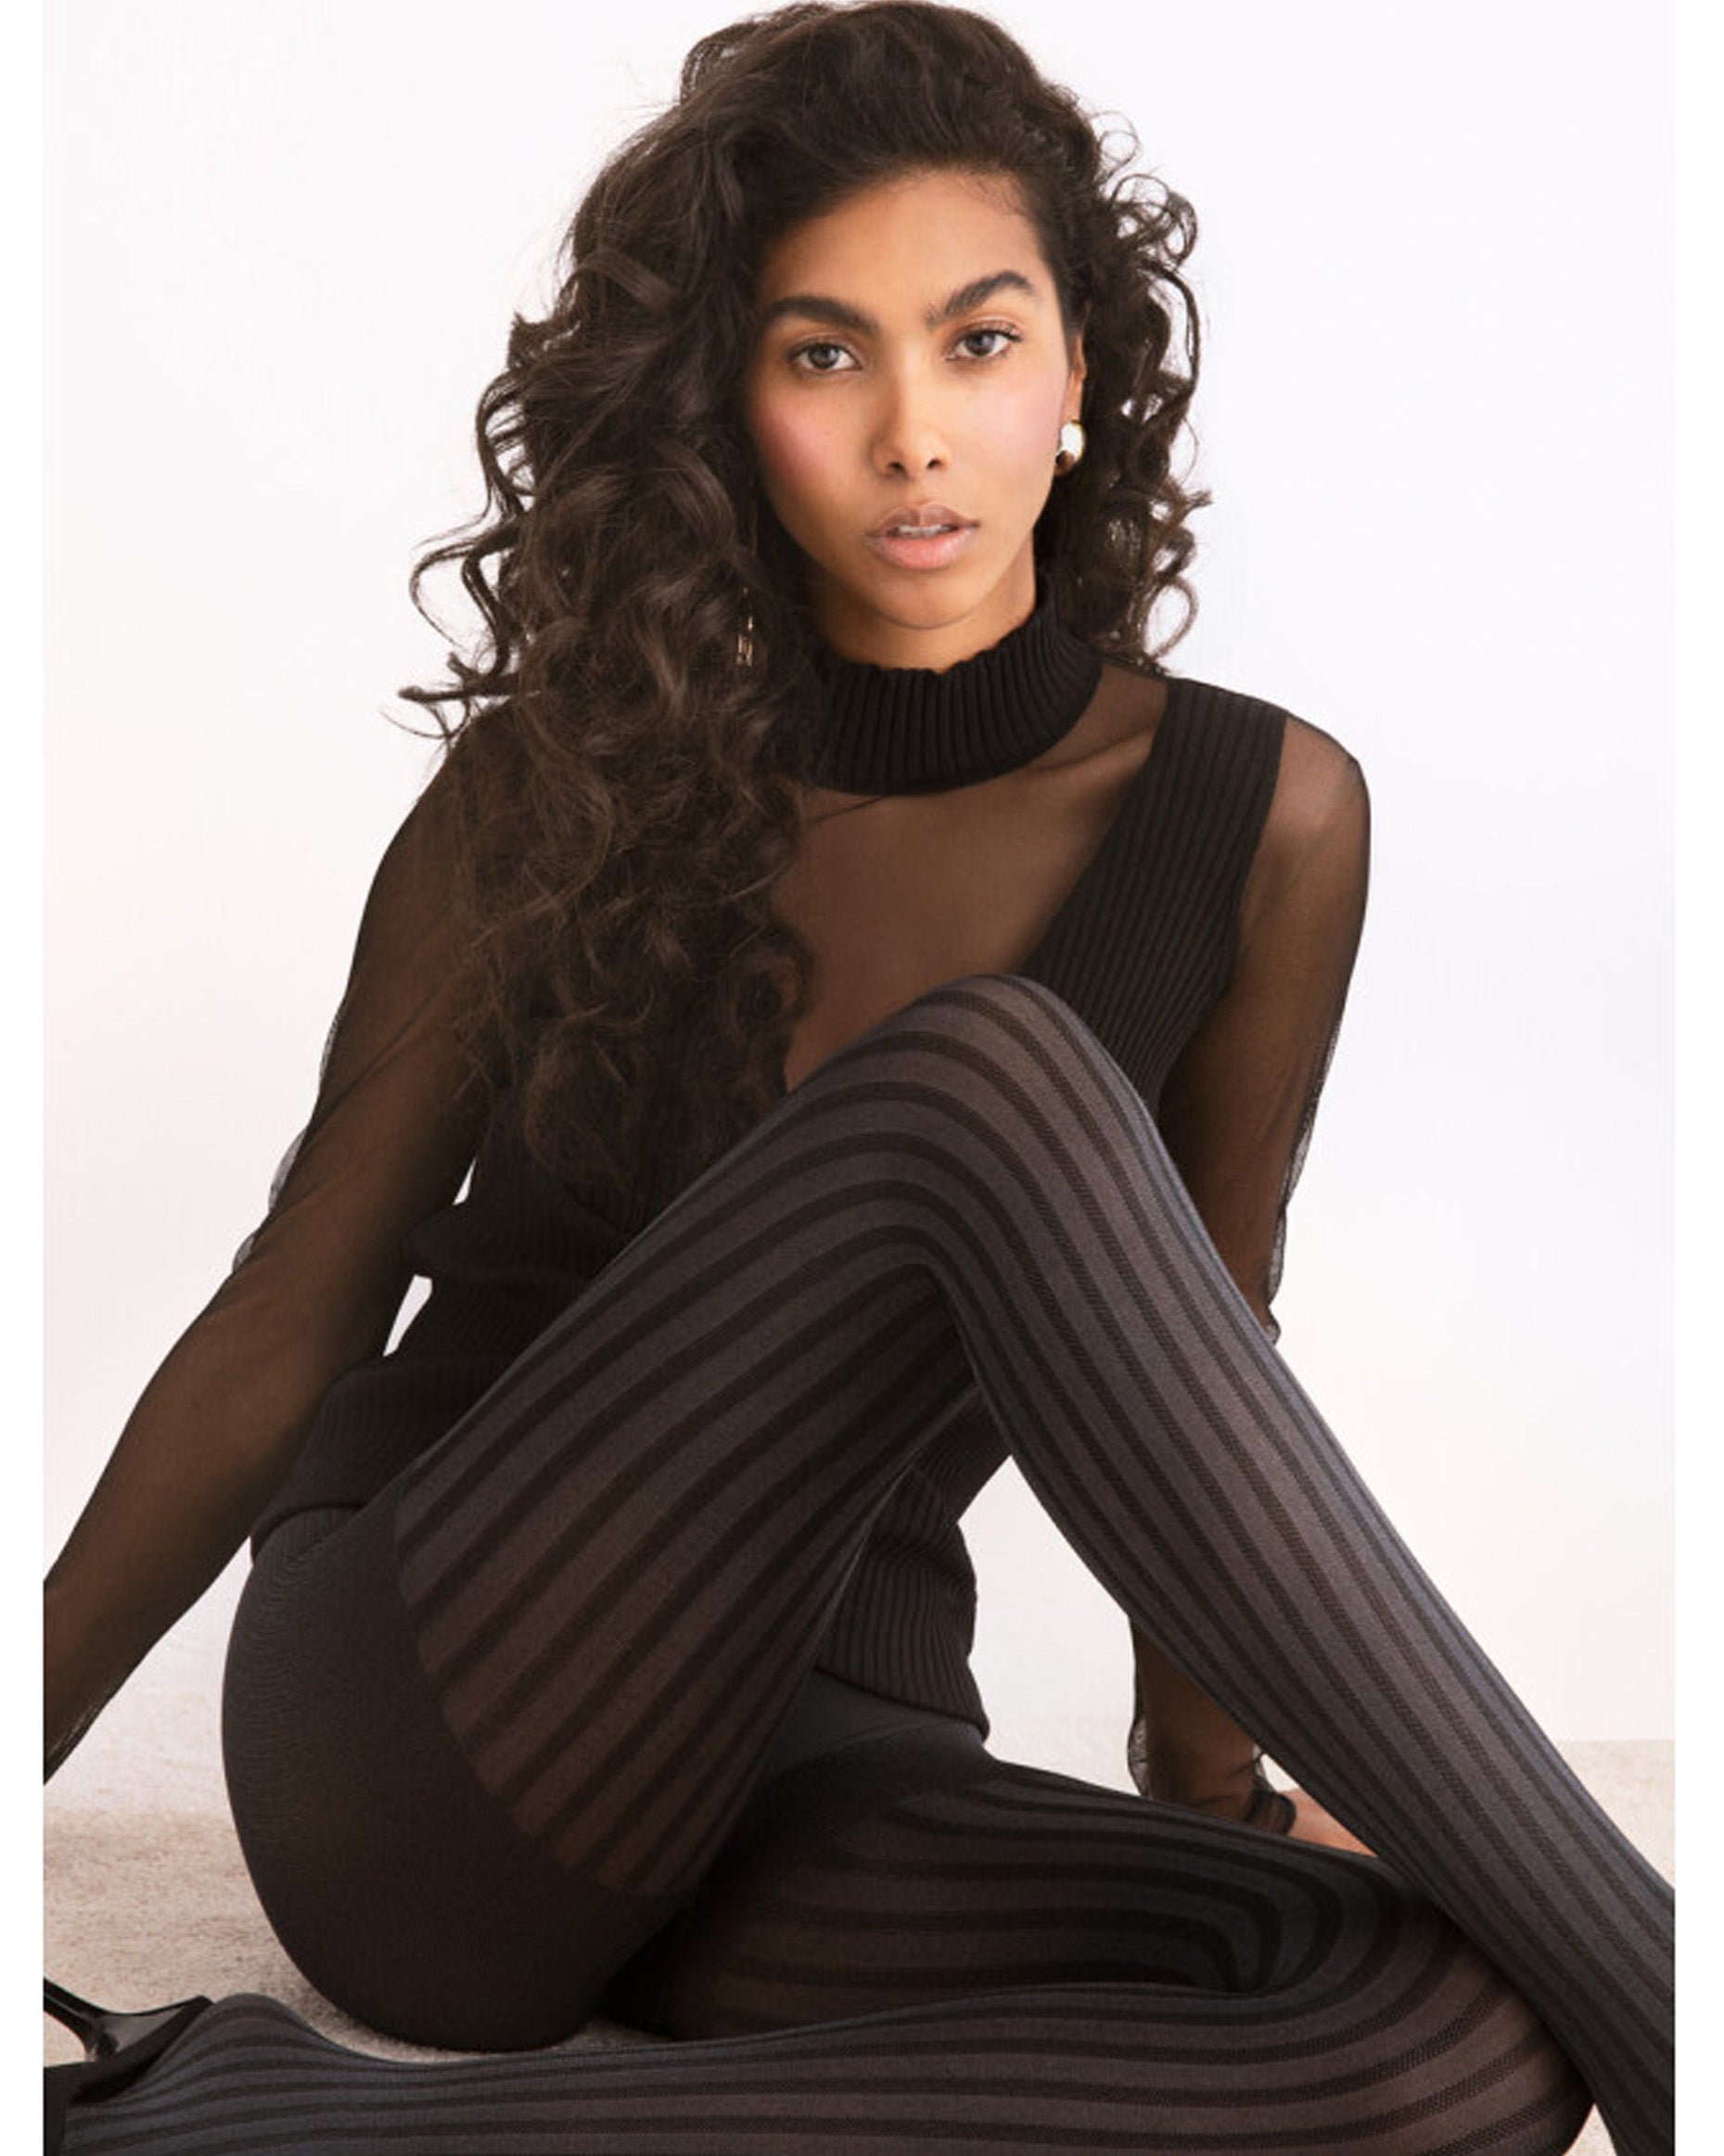 Fiore Colour Story Tights - Semi-opaque grey fashion tights with a two toned vertical stripe and gloss shine finish.